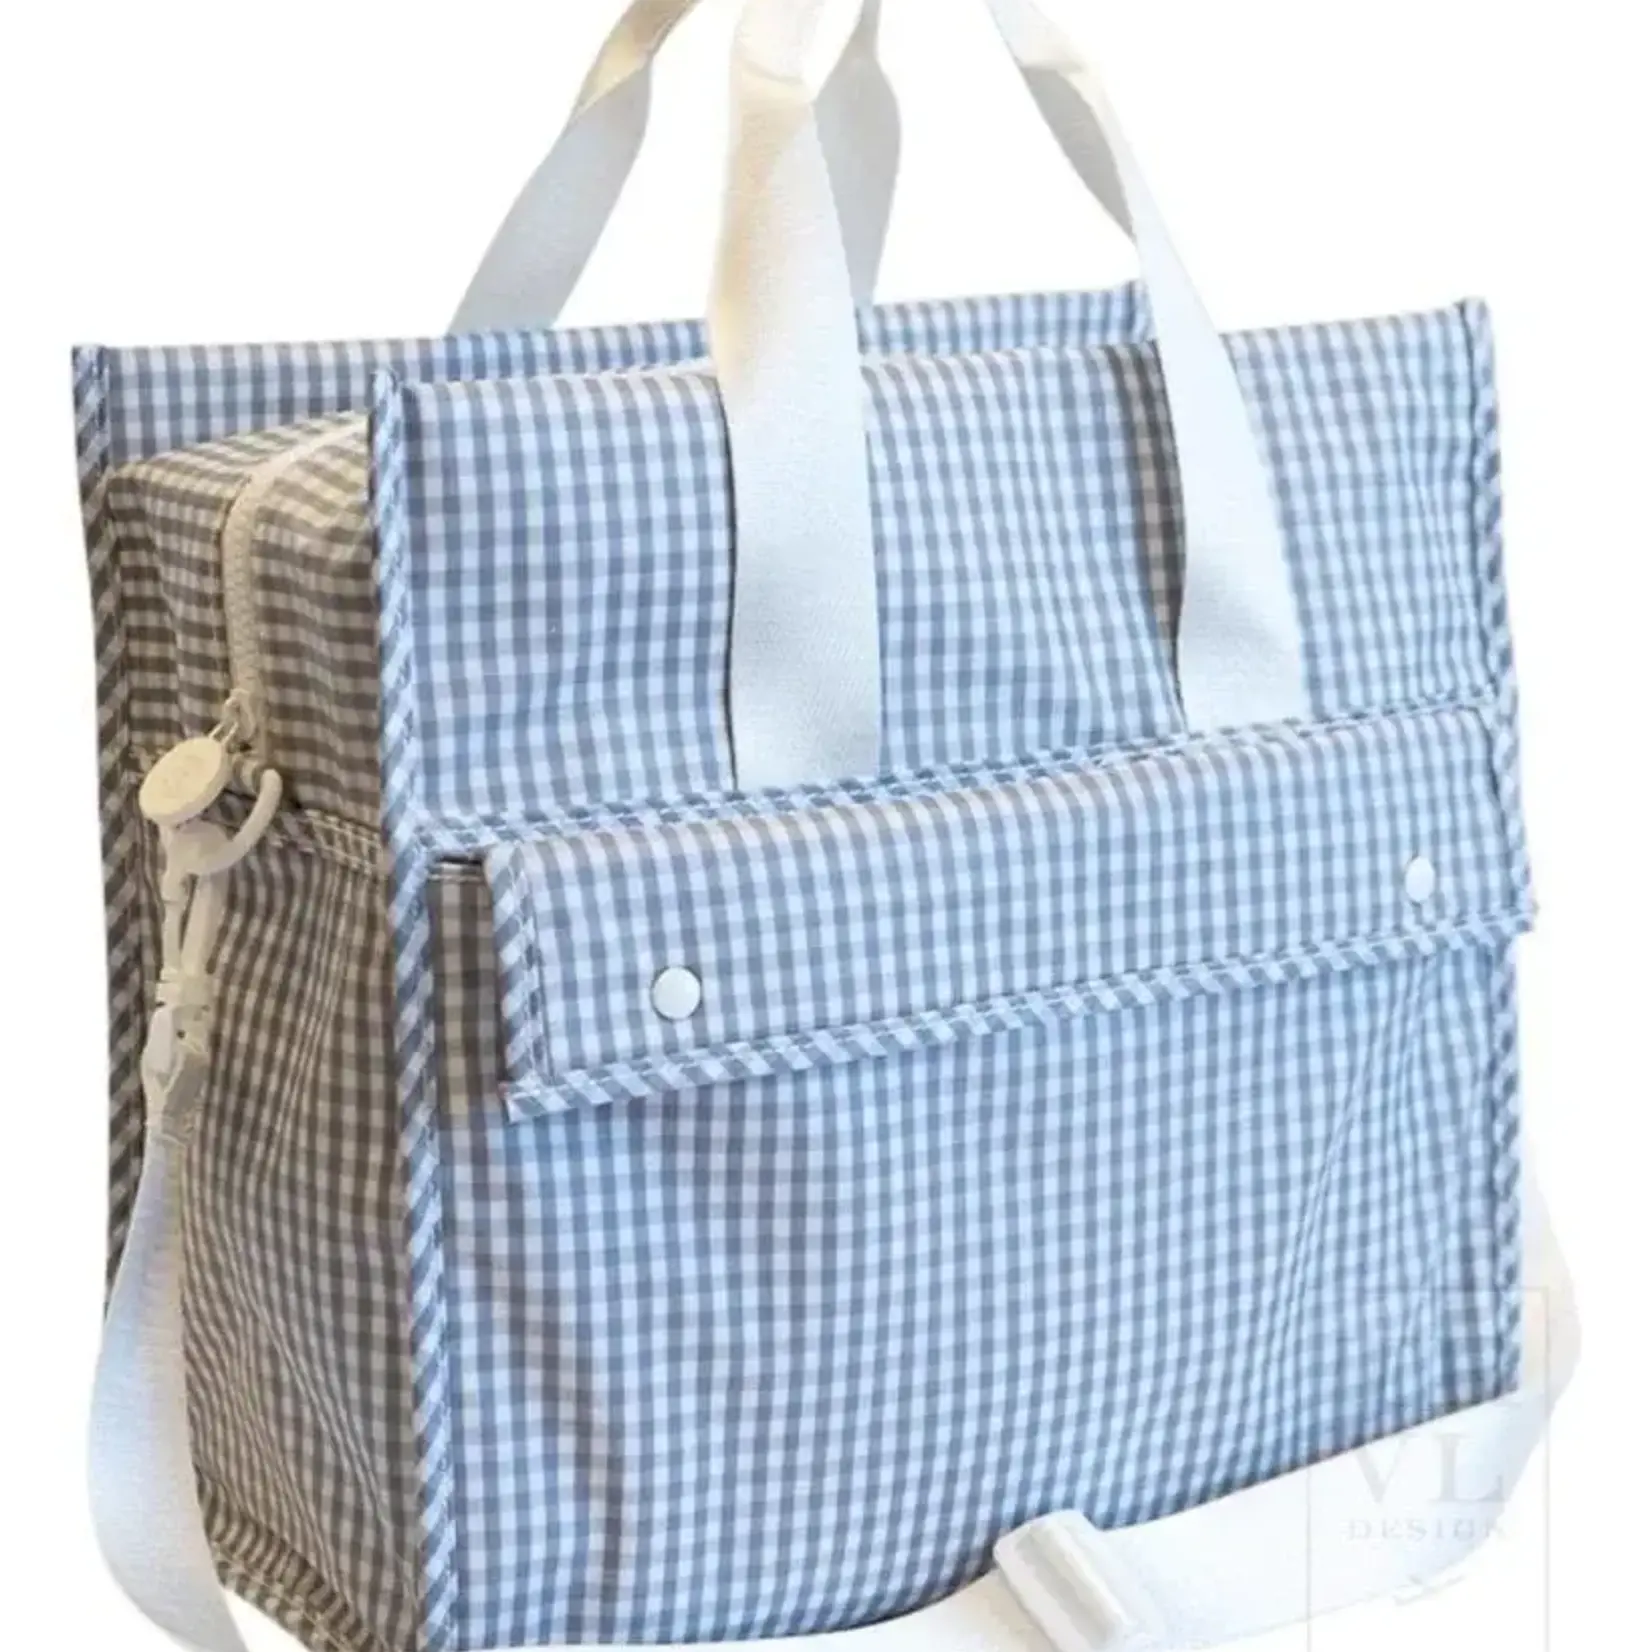 TRVL Gingham Gray First Class Tote